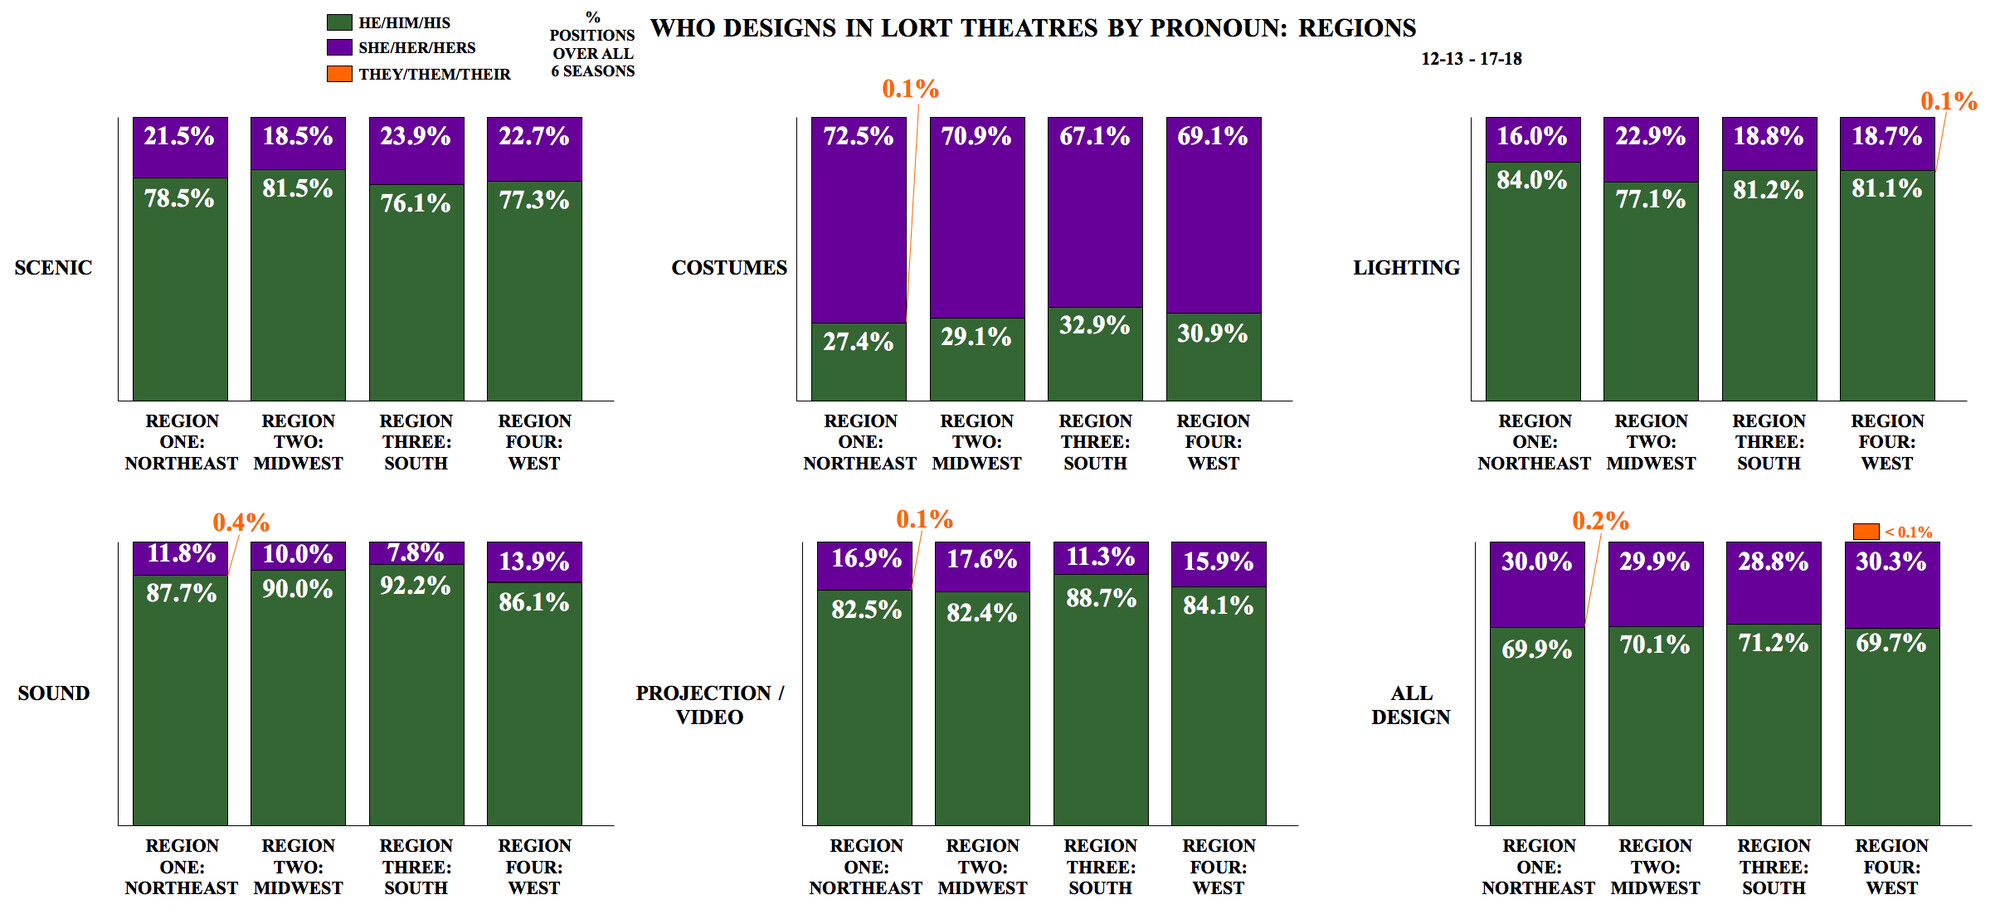 Who Designs in LORT Theatres by Pronoun: Regions